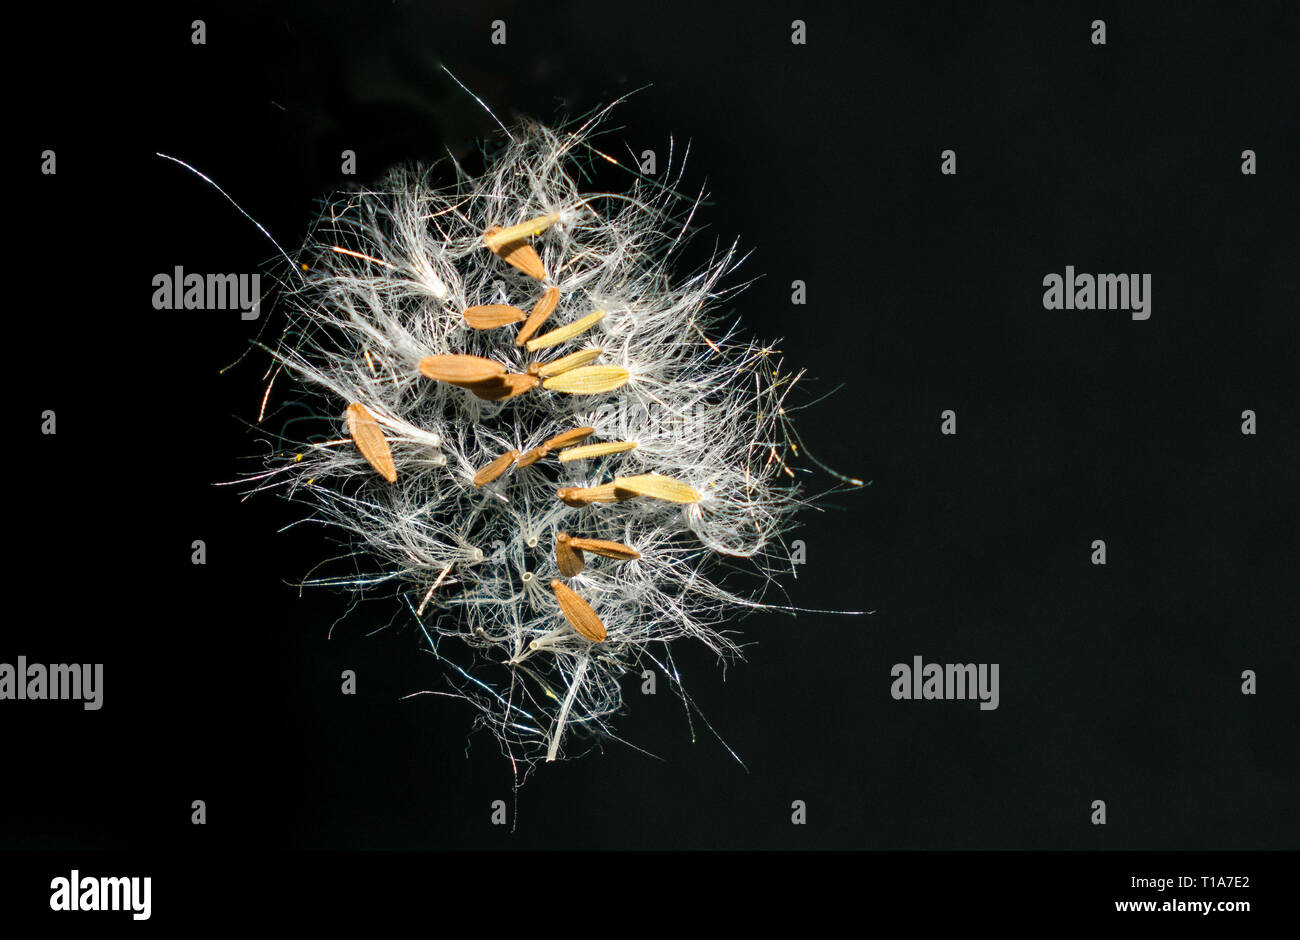 dandelion seed flying in the air with black background. Stock Photo